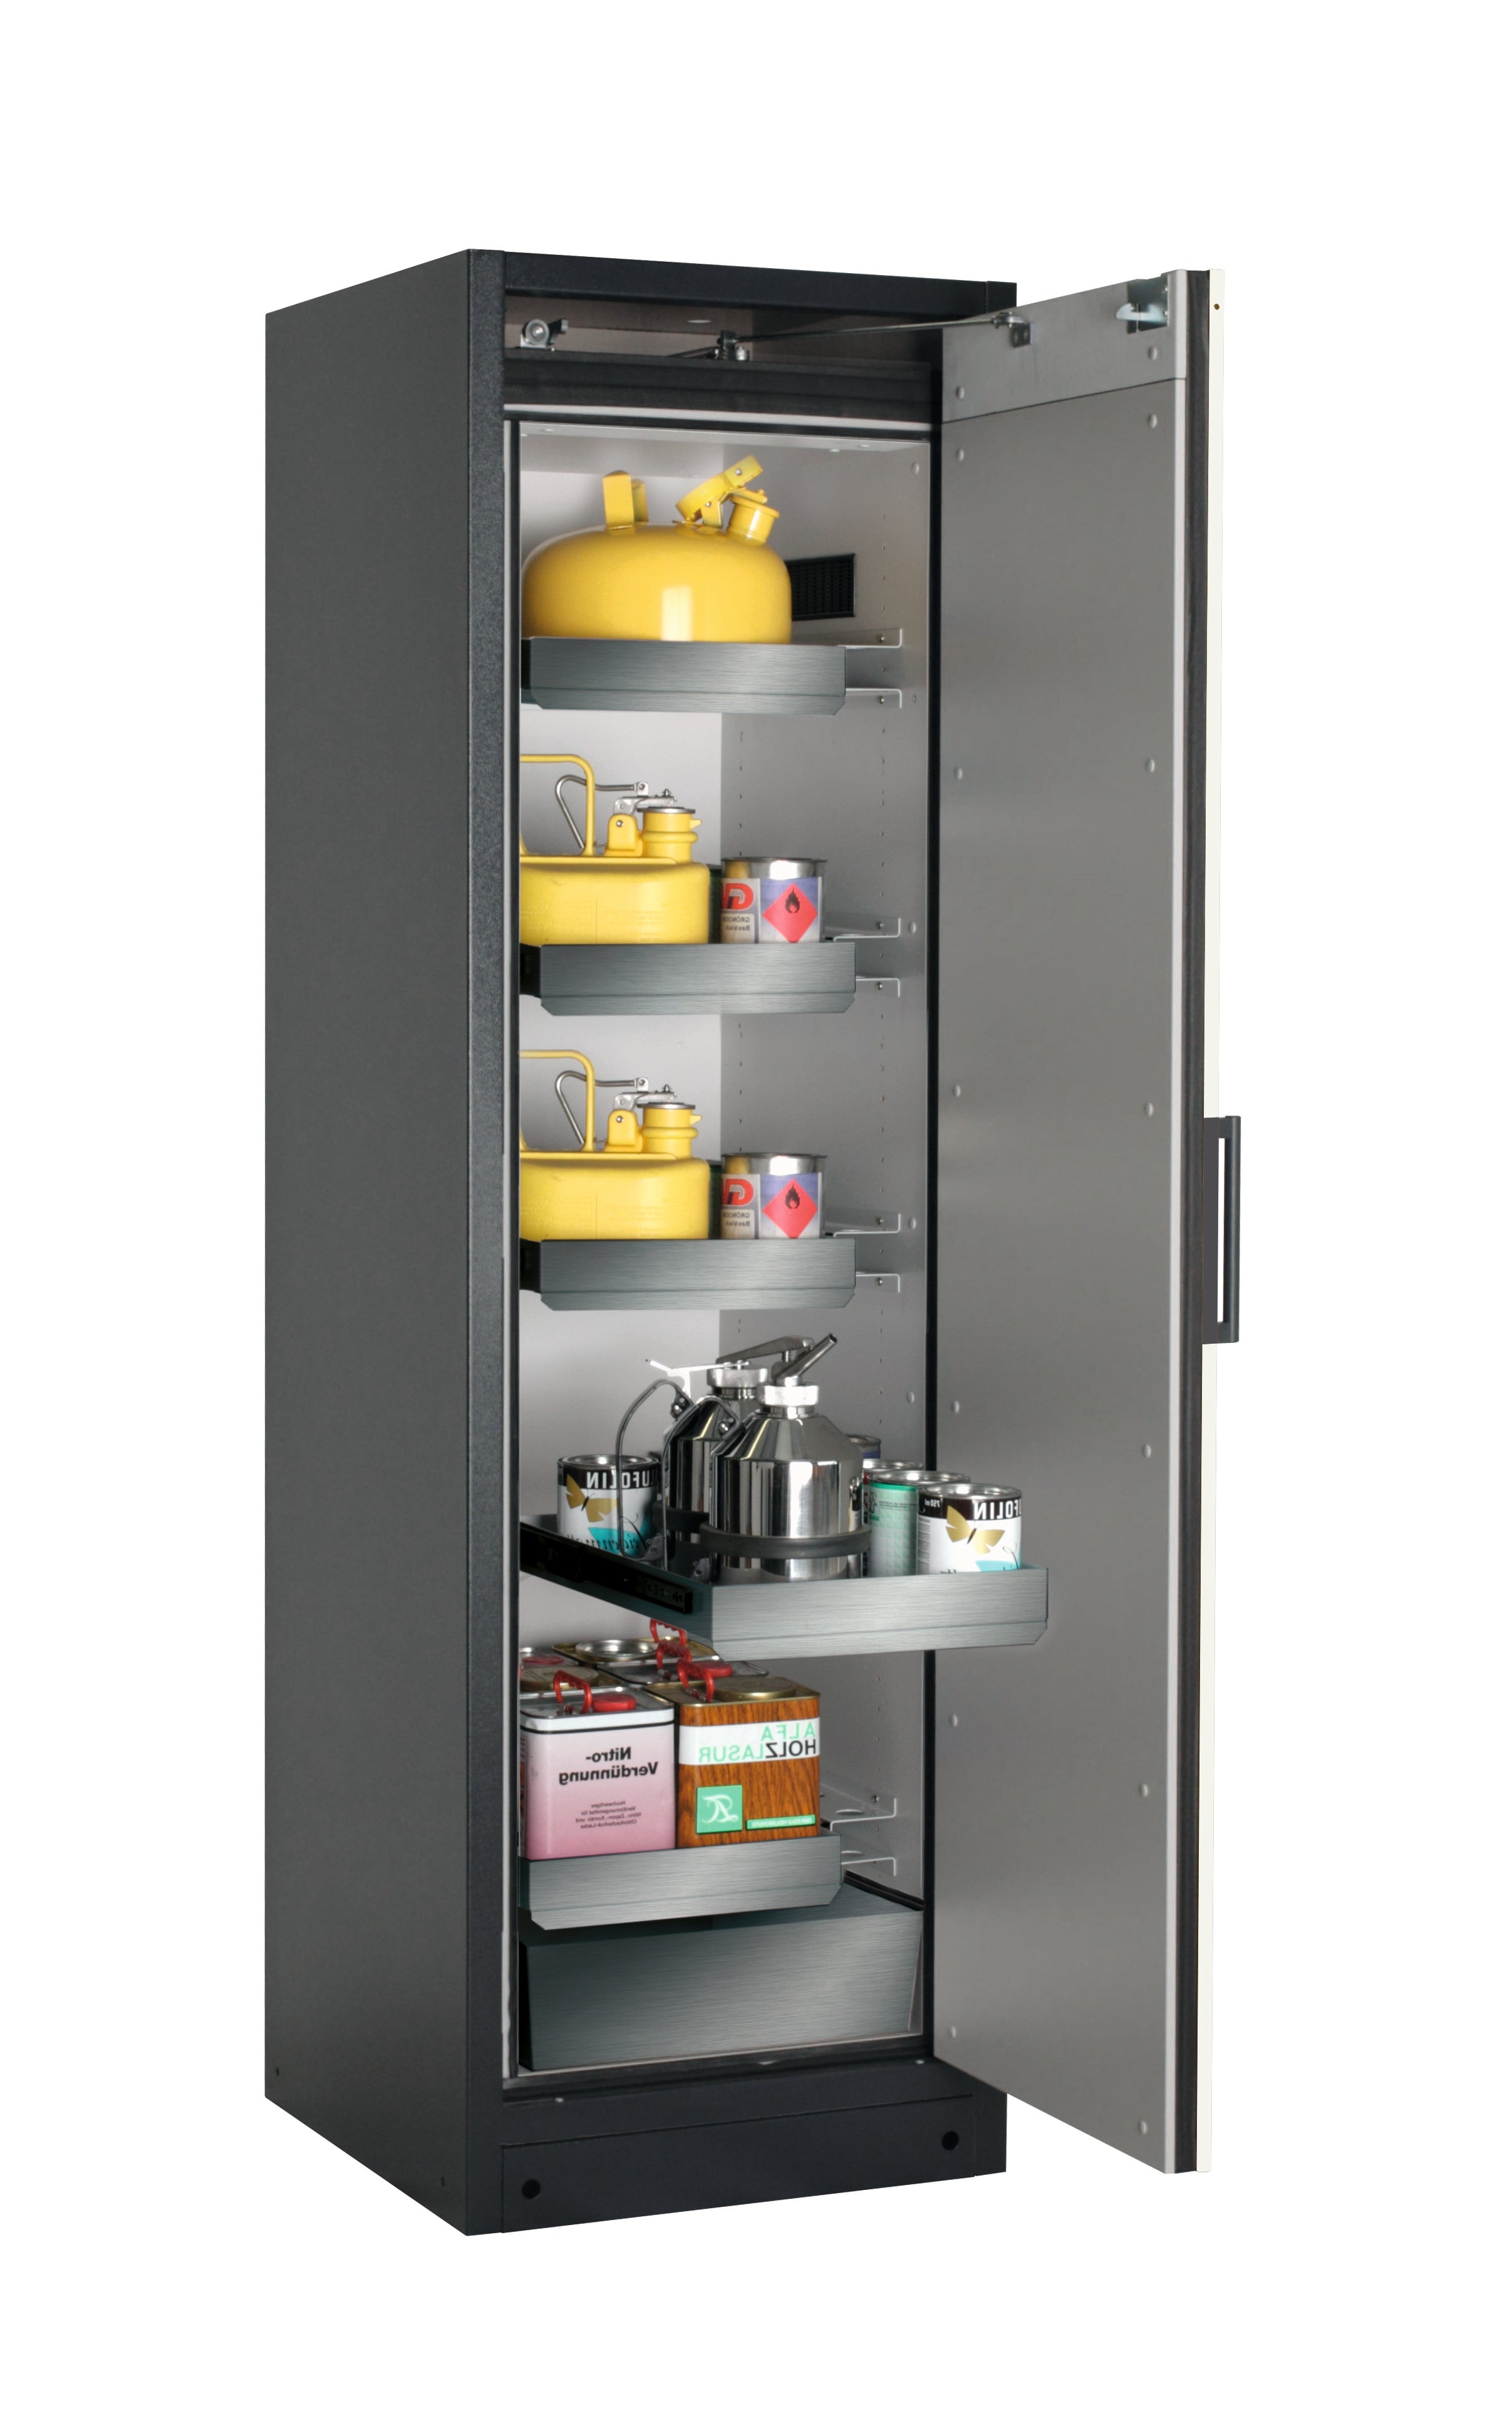 Type 90 safety storage cabinet Q-CLASSIC-90 model Q90.195.060.R in asecos silver with 4x drawer (standard) (stainless steel 1.4301),